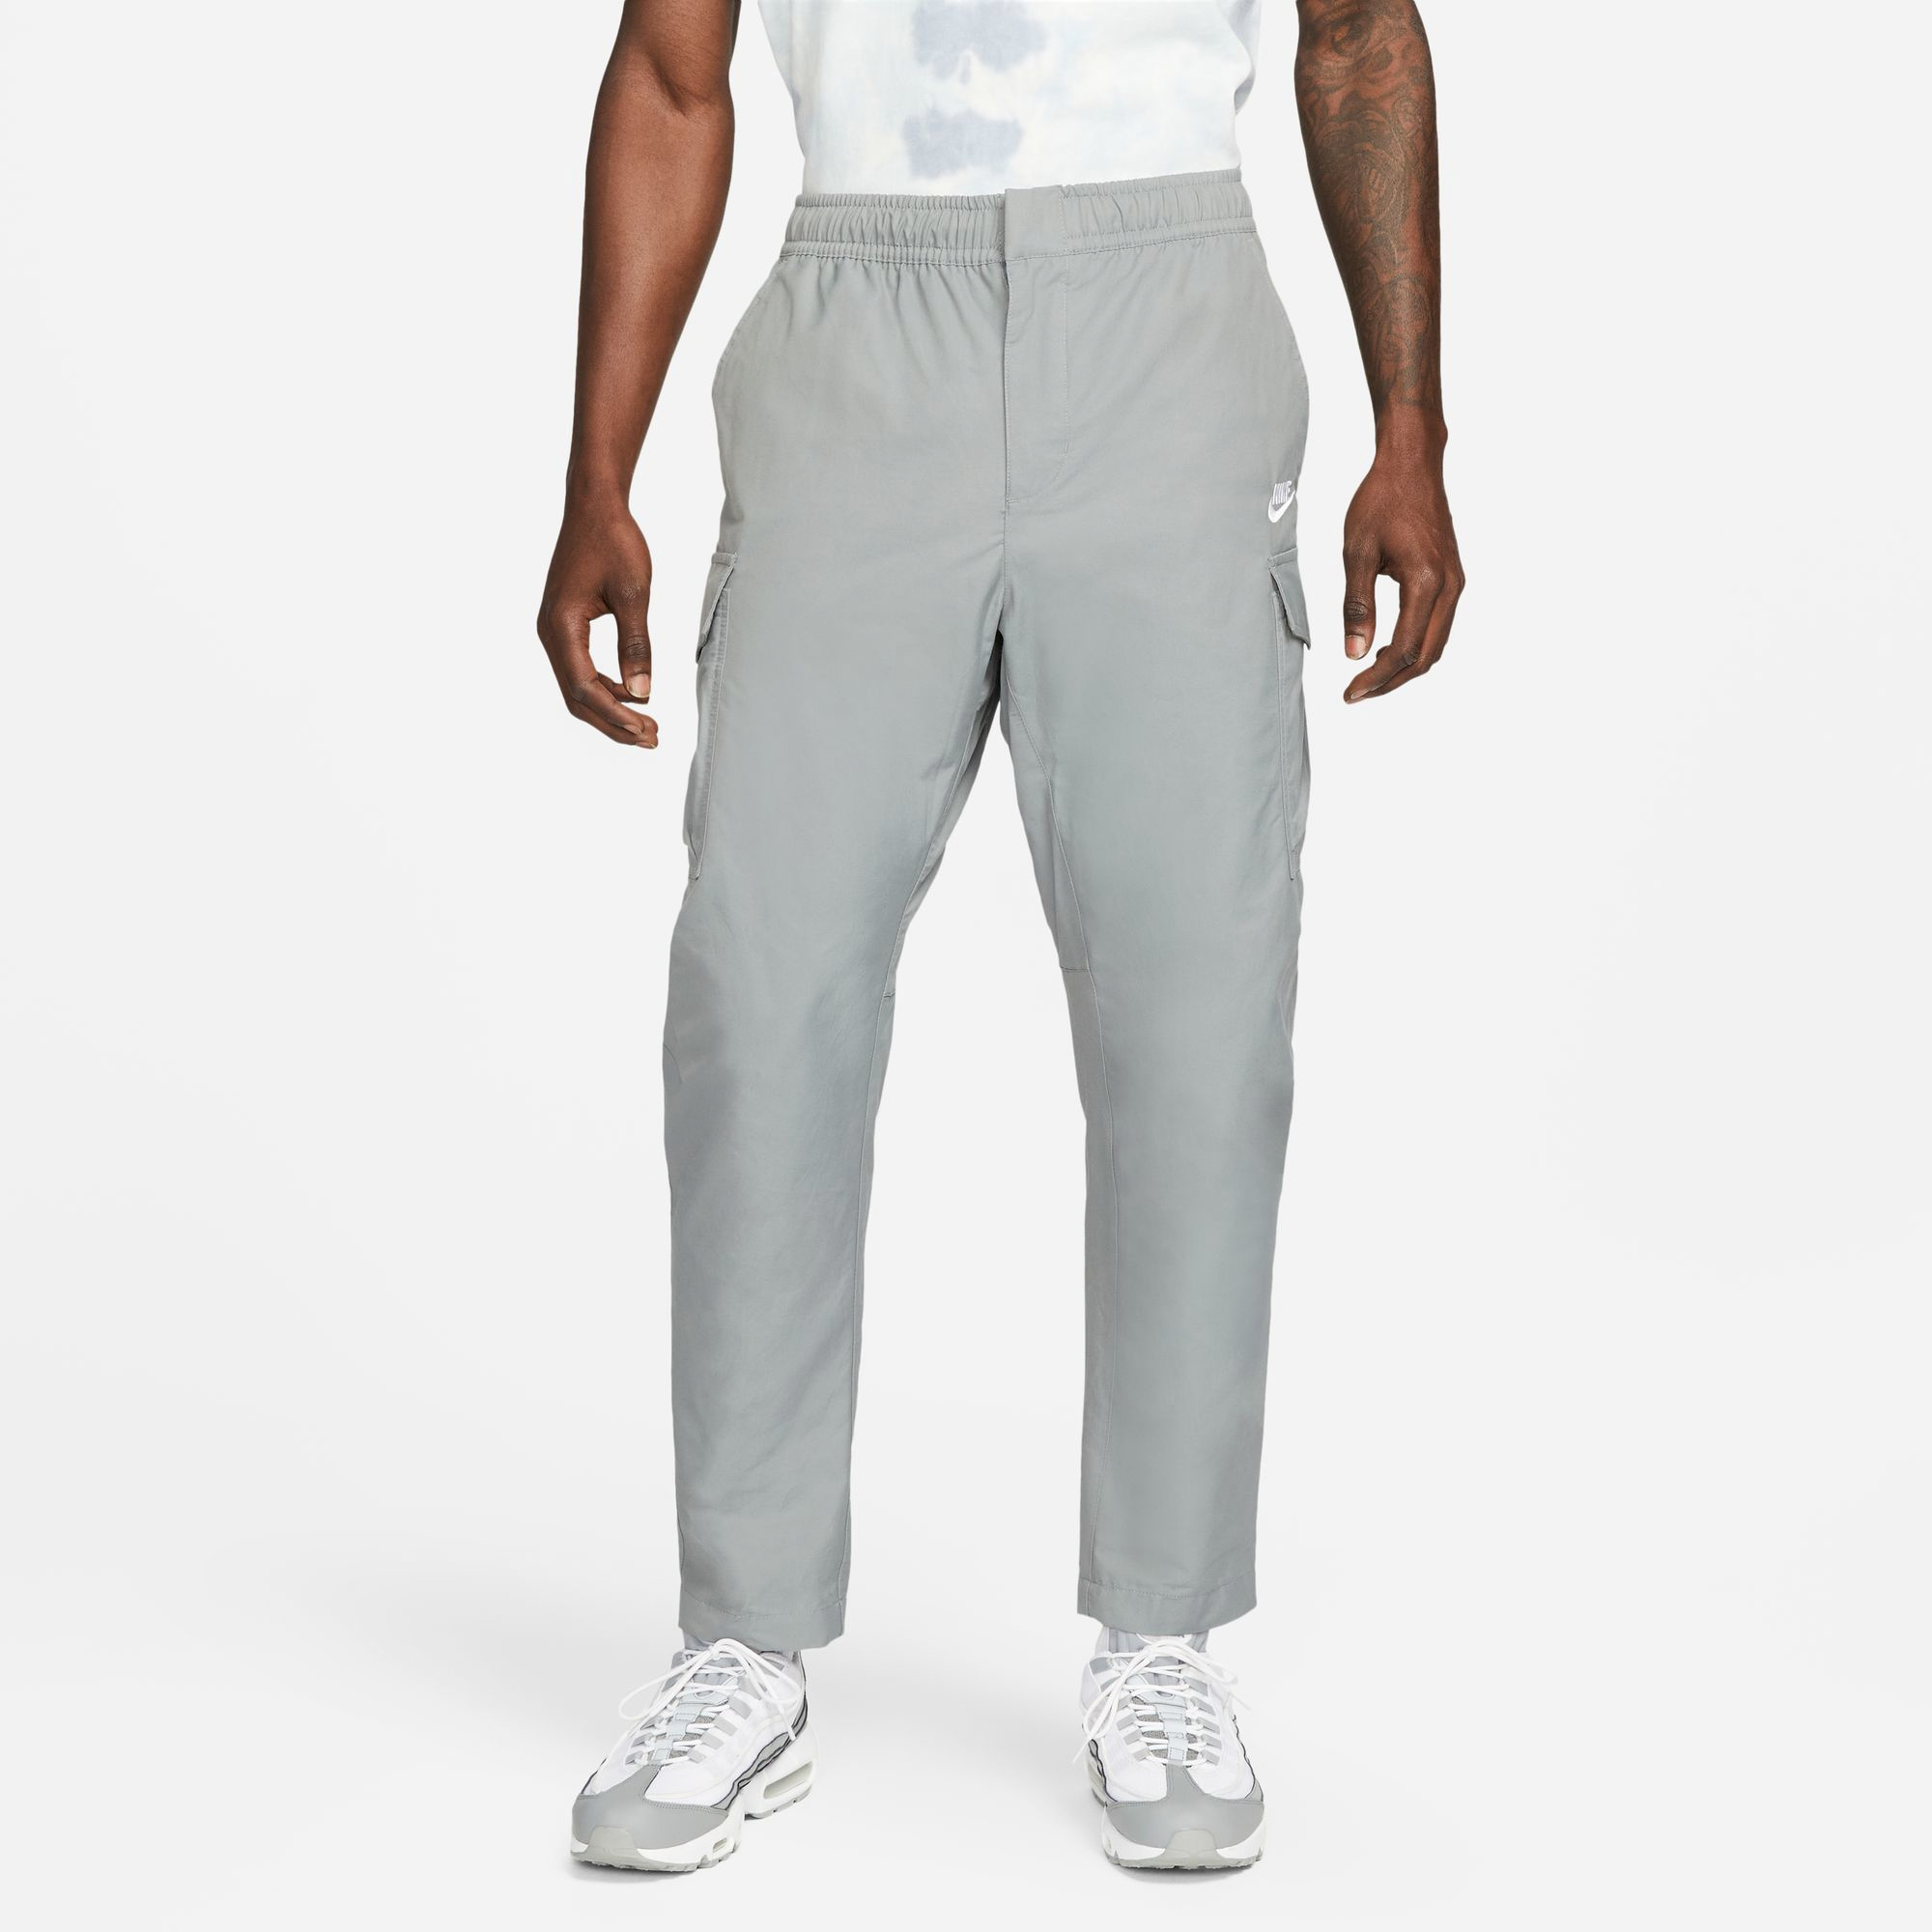 Nike SPE Woven Utility Pants | Champs Sports Canada